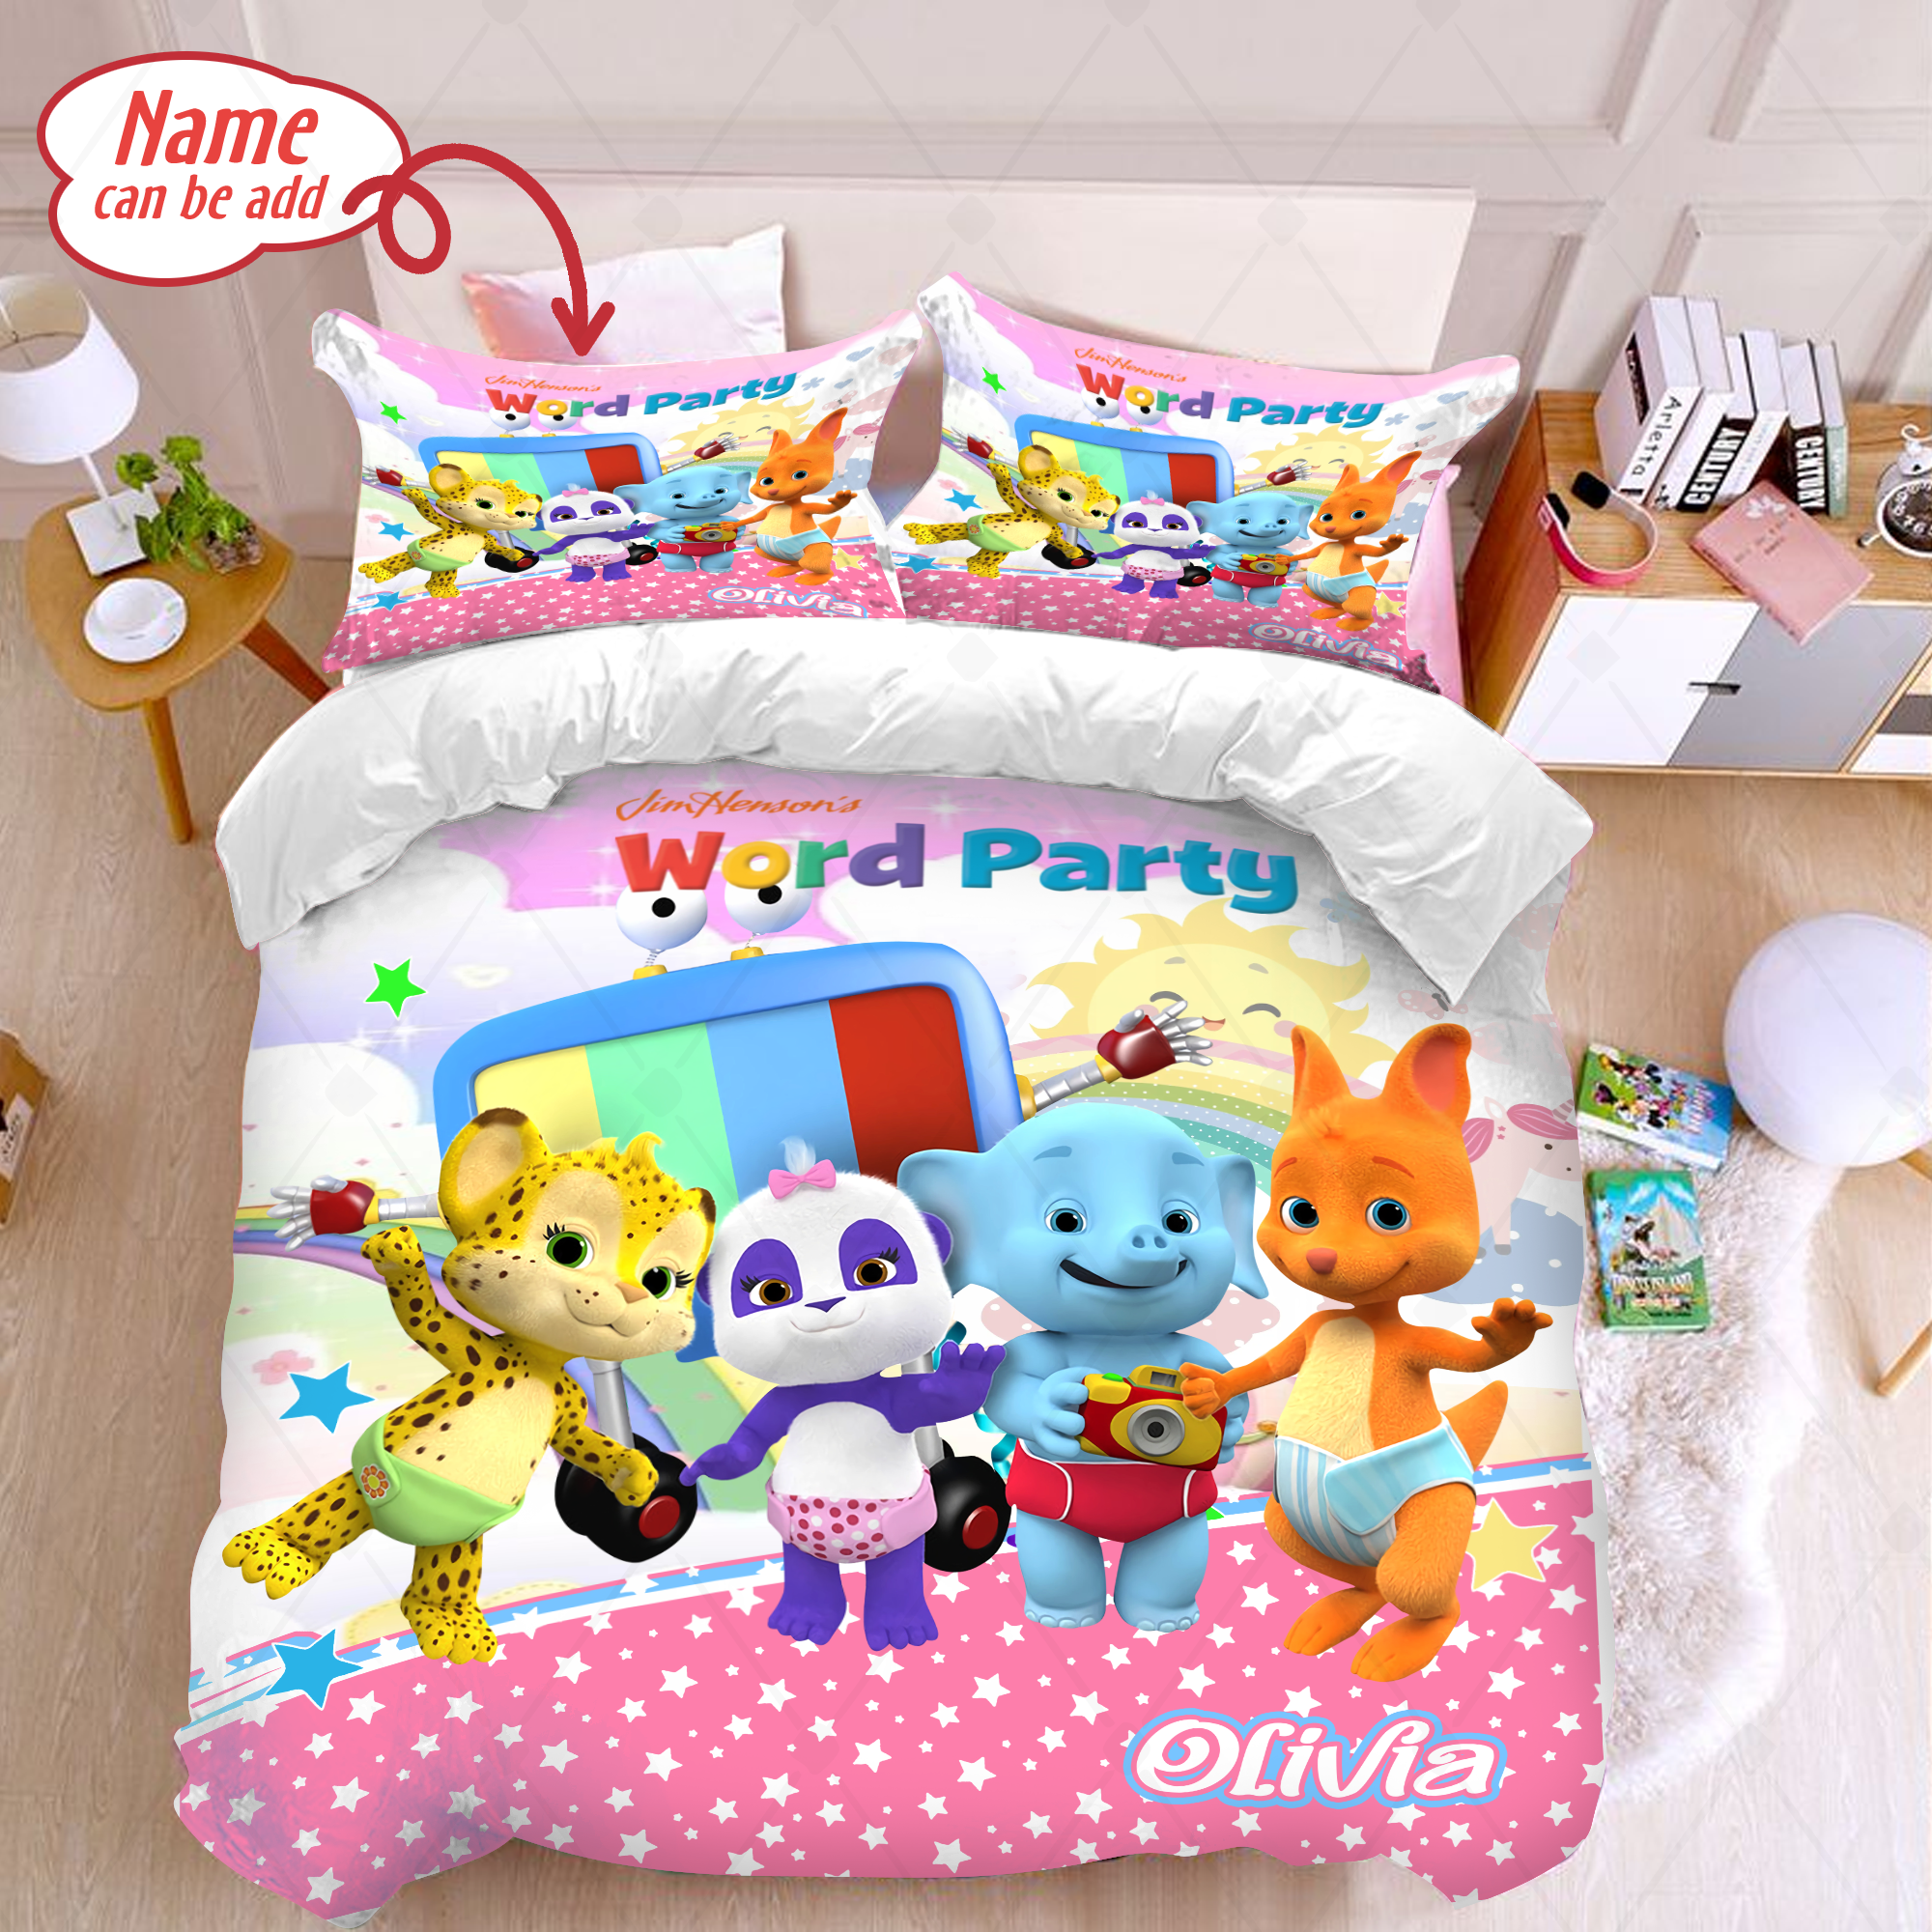 Personalized Word Party Duvet Cover And Pillowcase Bedding Set Word Party Birthday Party Word Party Gift Cartoon Bedding Sets